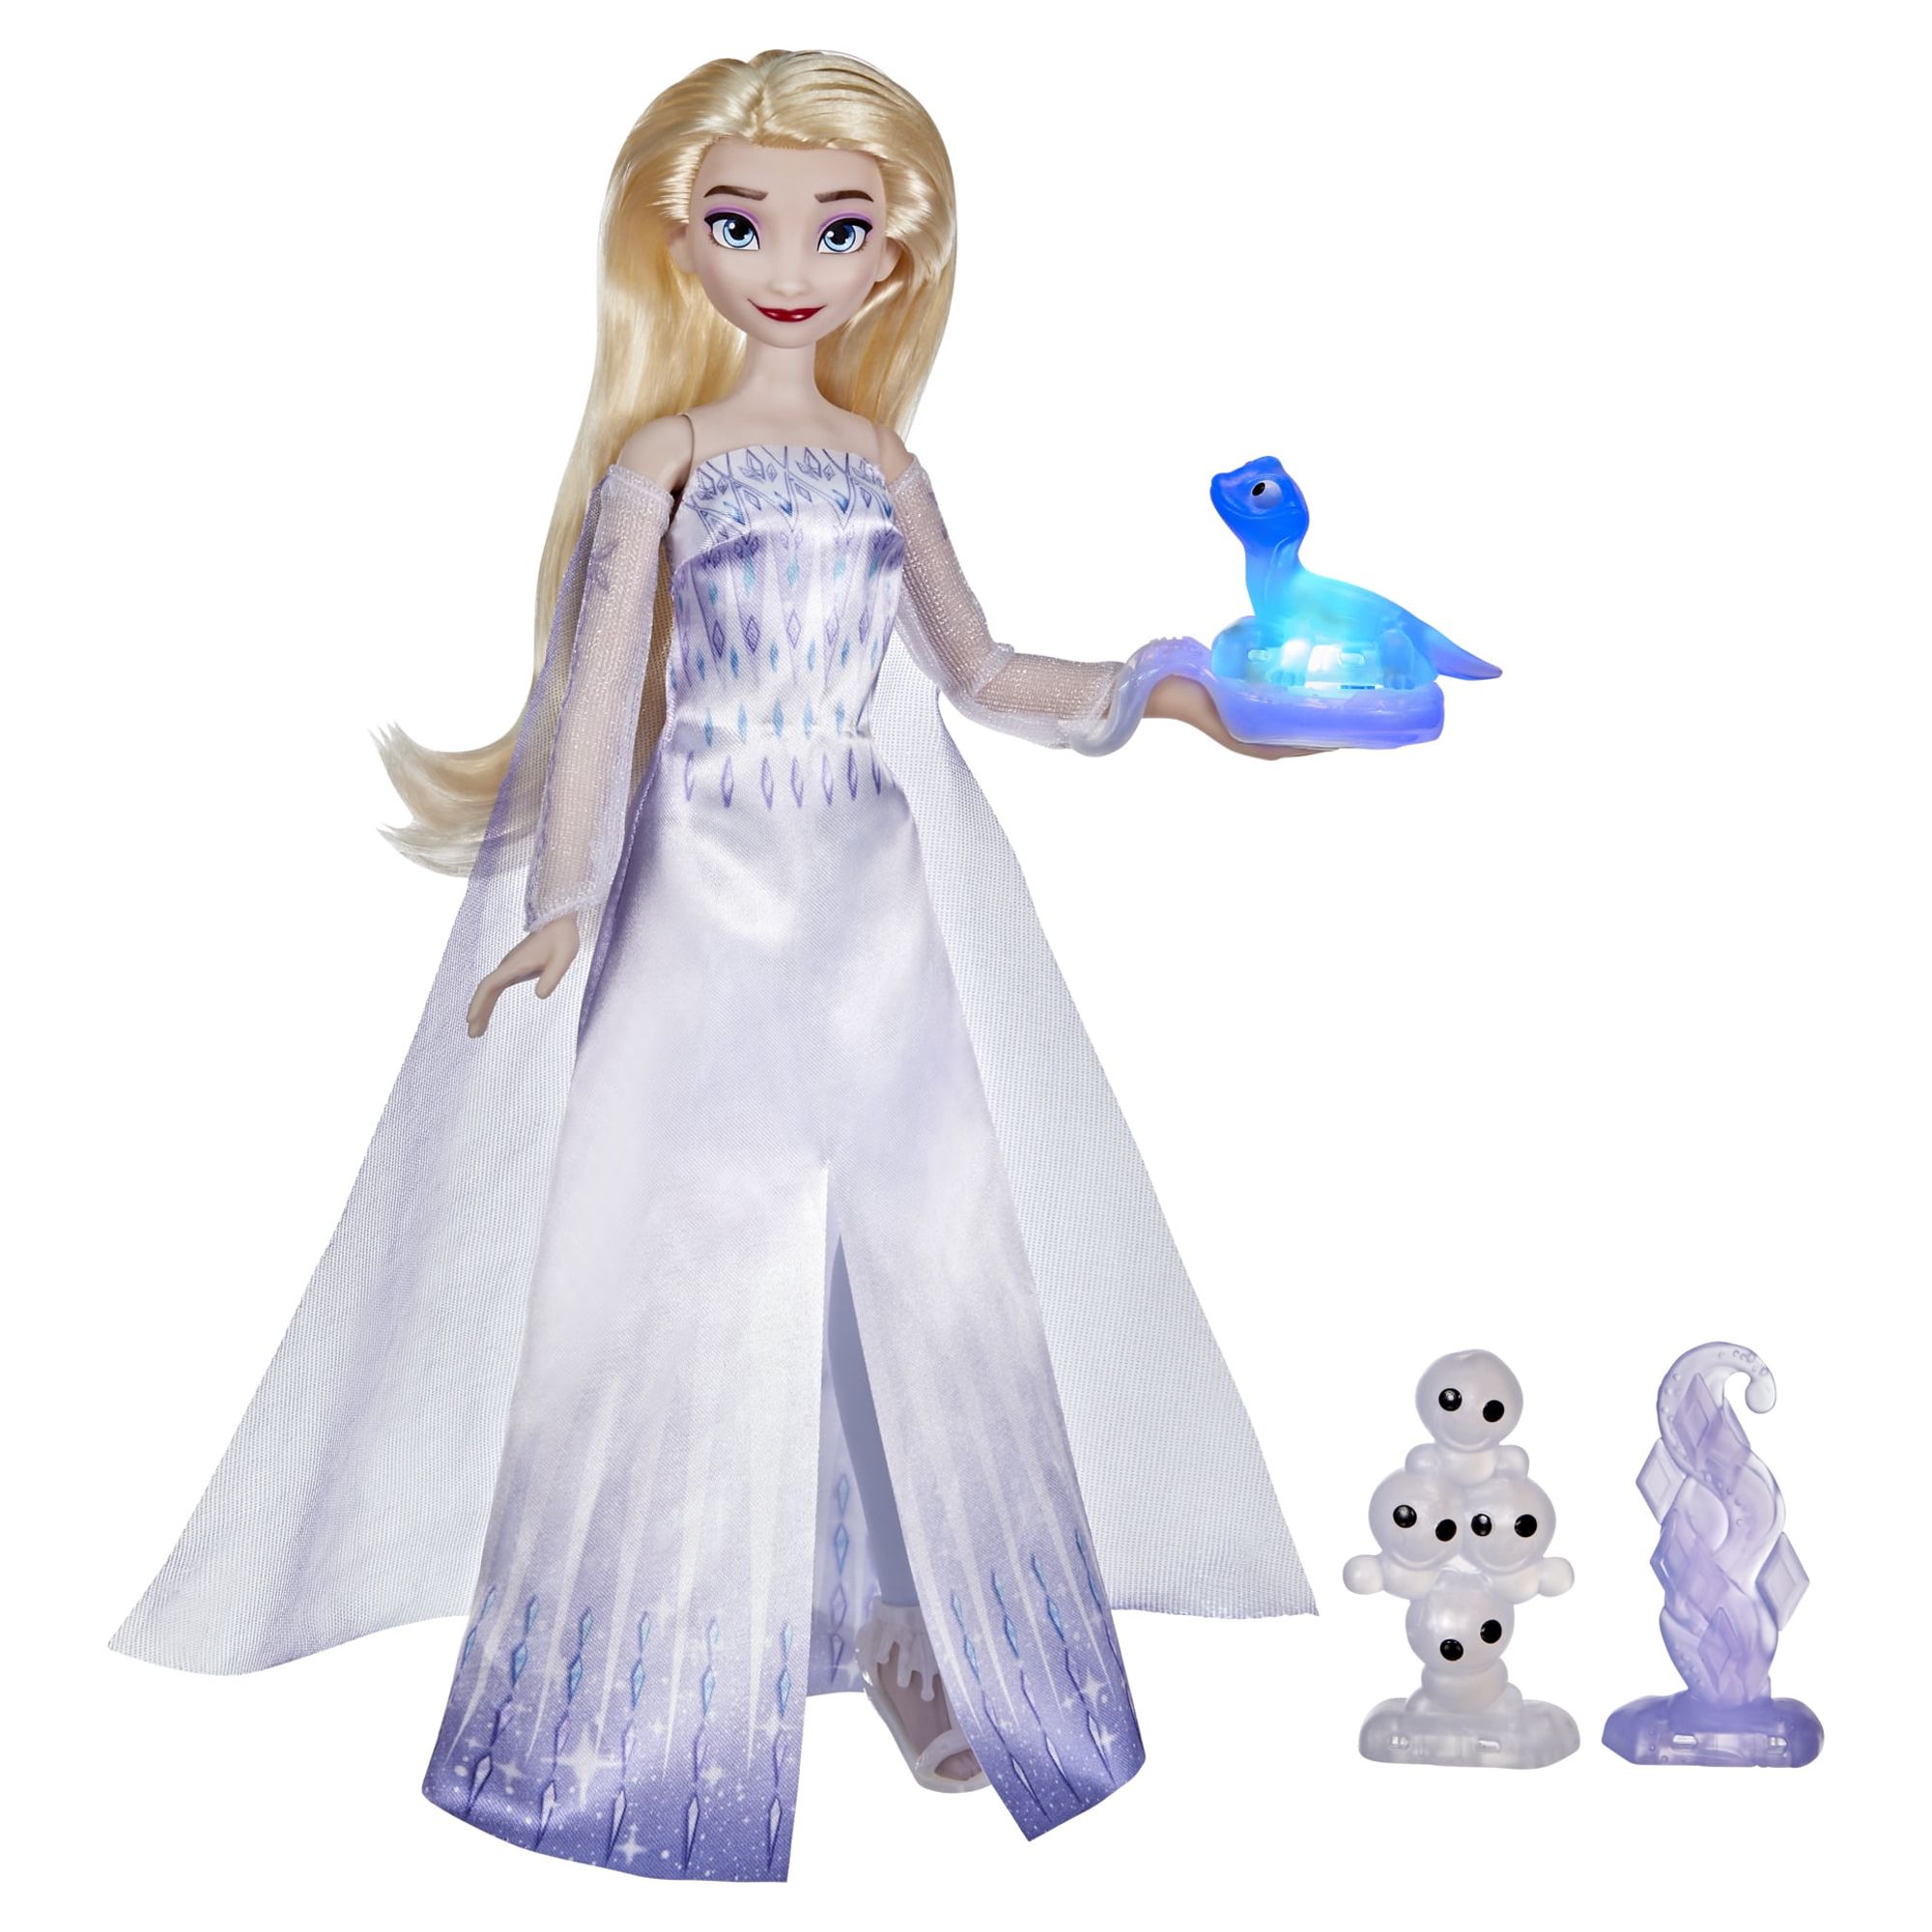 Disney's Frozen 2 Talking Elsa and Friends Elsa Doll, 20+ Sounds and Phrases - image 1 of 5